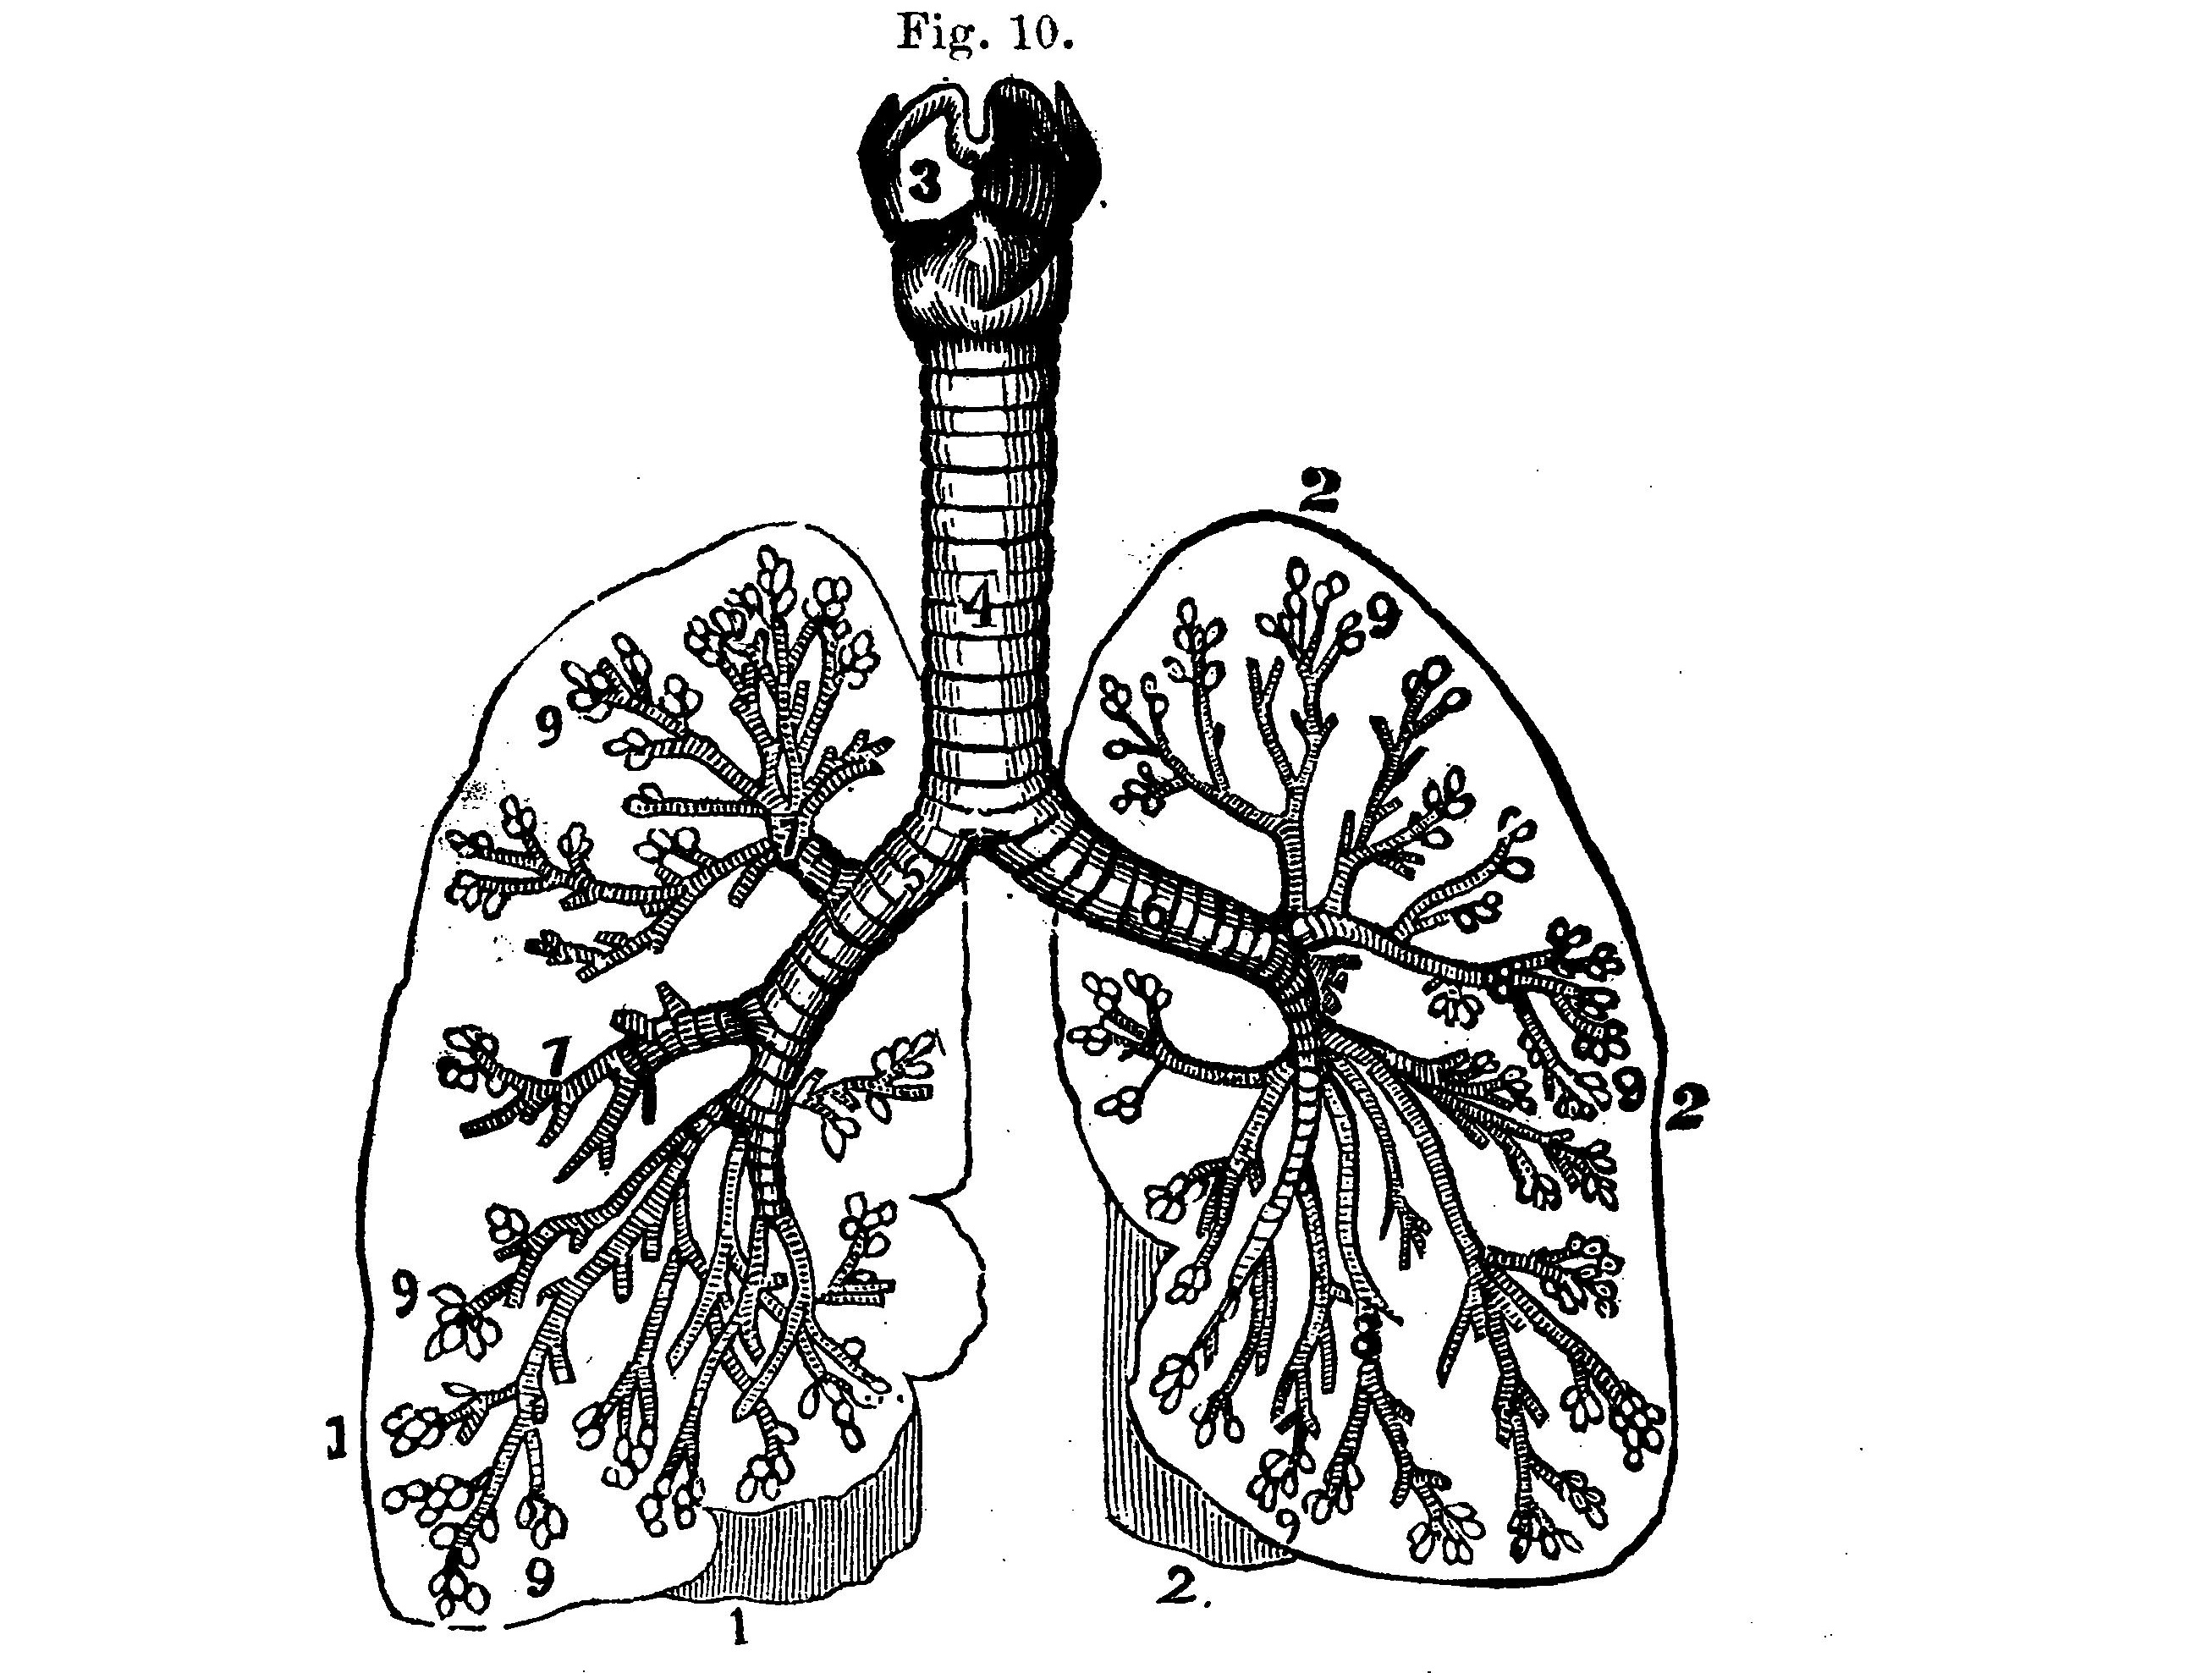 illustration of lungs